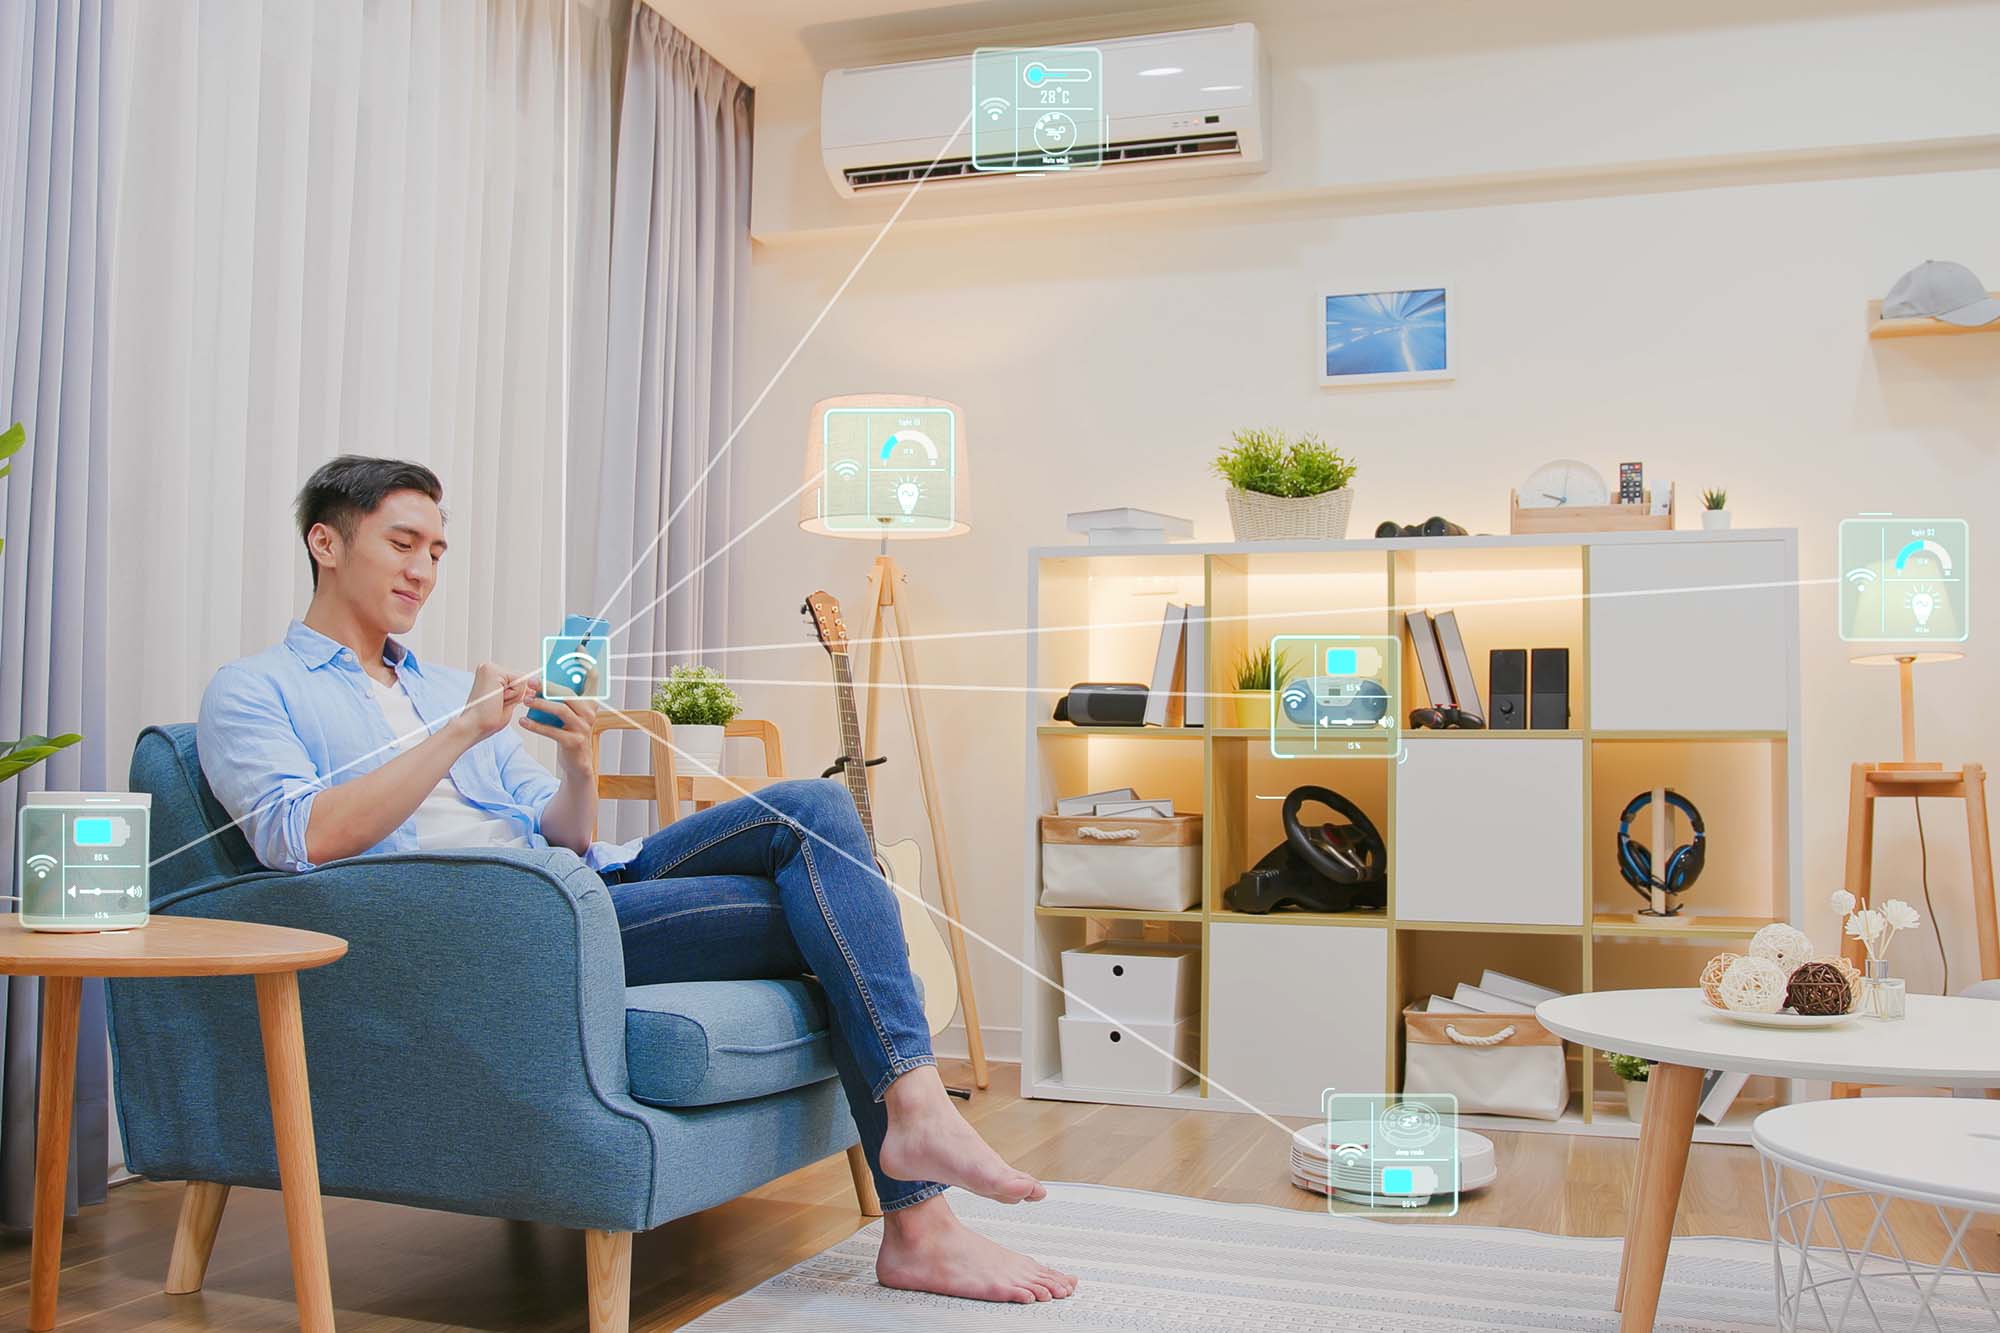 smart home automation connects your smart devices together.